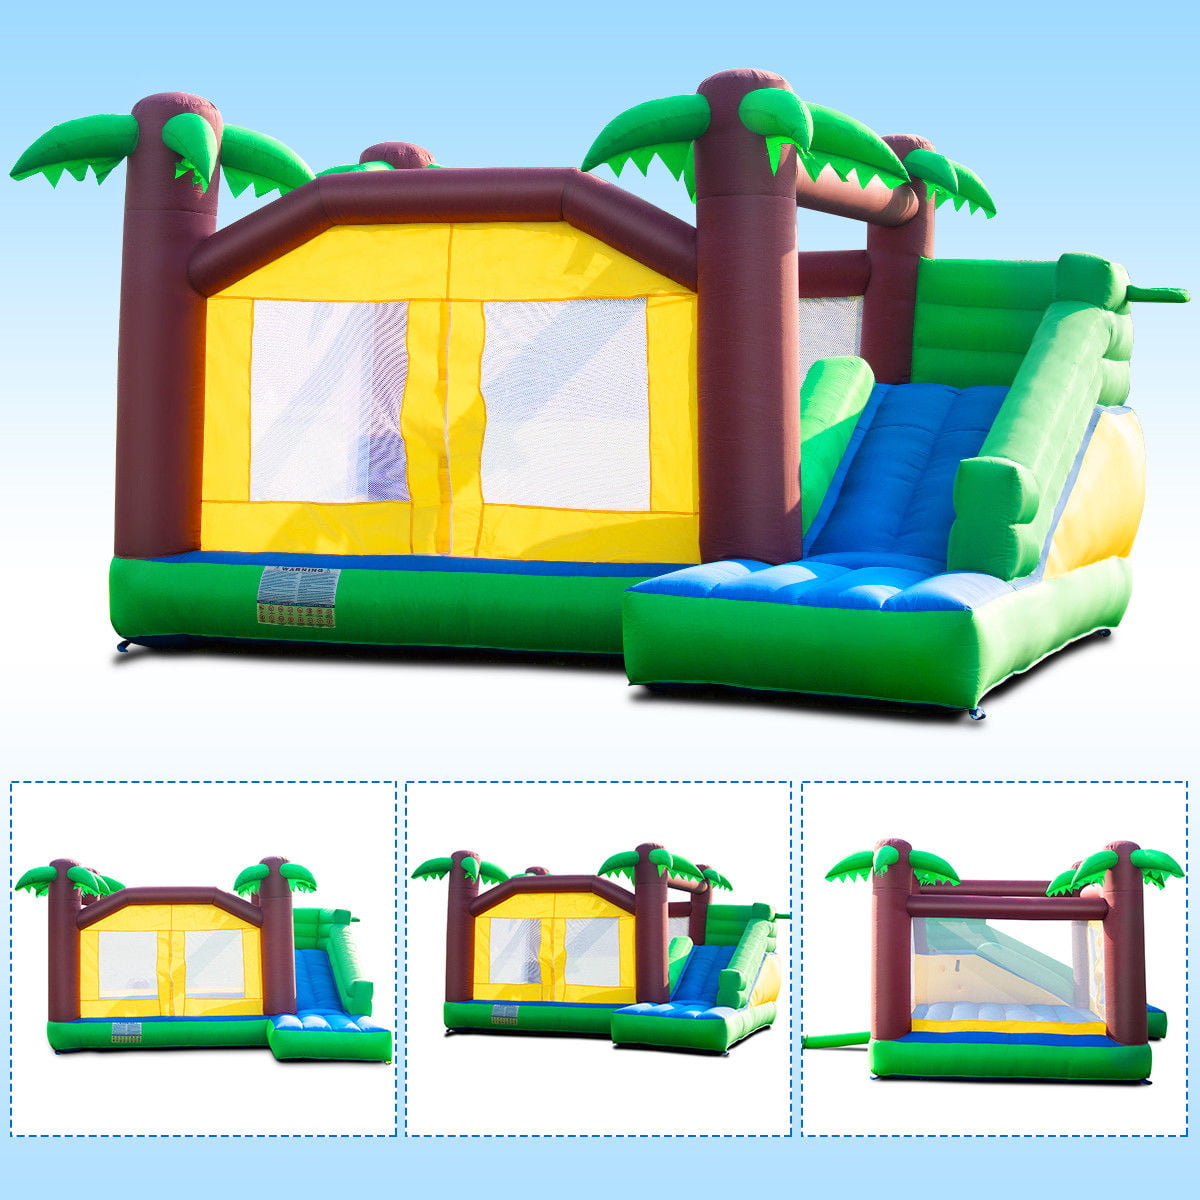 Details about   Goplus Inflatable Bounce House Castle Commercial Kids Jumper Moonwalk With Ball 